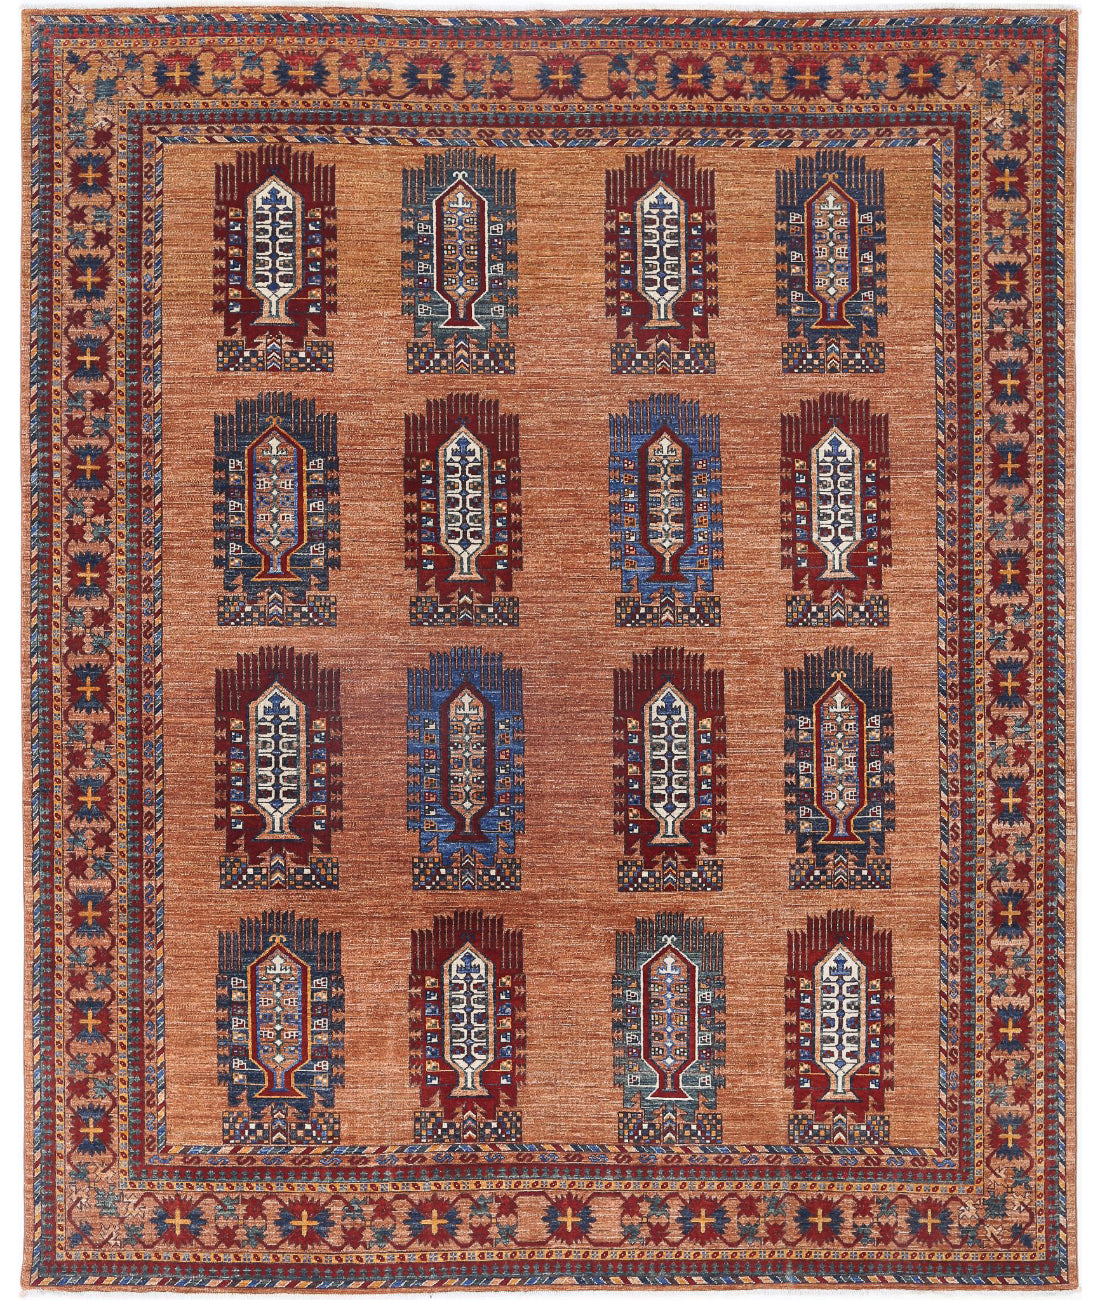 Hand Knotted Nomadic Caucasian Humna Wool Rug - 8'1'' x 10'0'' 8'1'' x 10'0'' (243 X 300) / Brown / Red